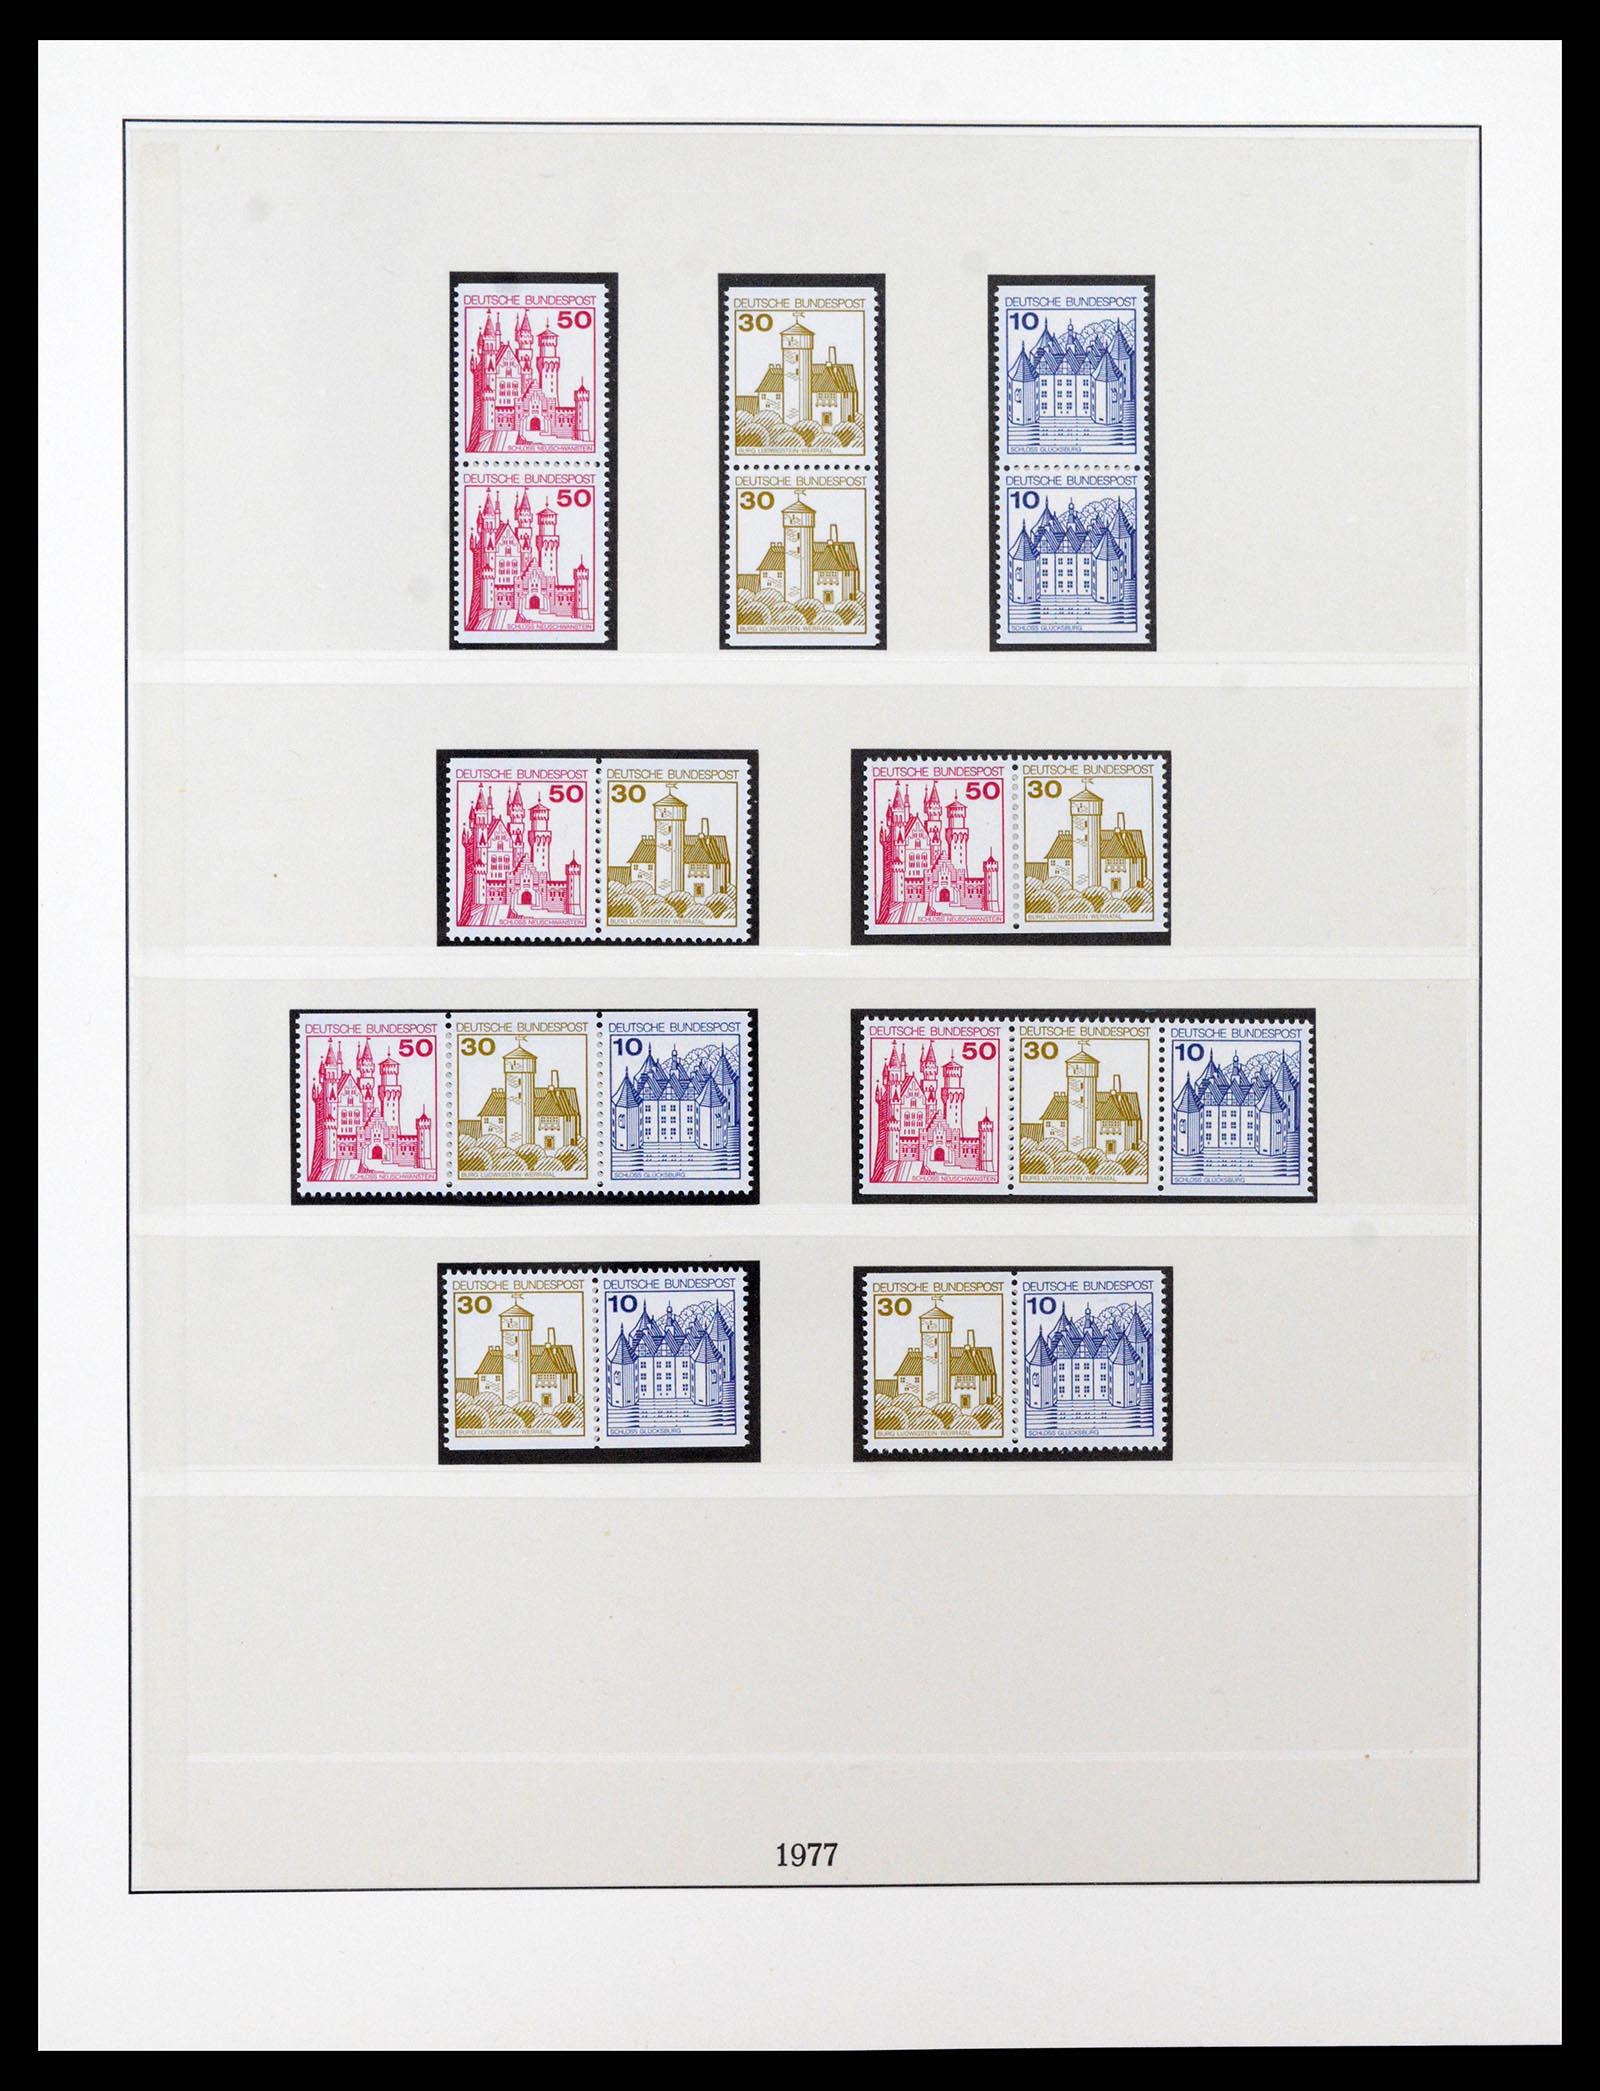 37336 013 - Stamp collection 37336 Bundespost combinations 1955-1980.